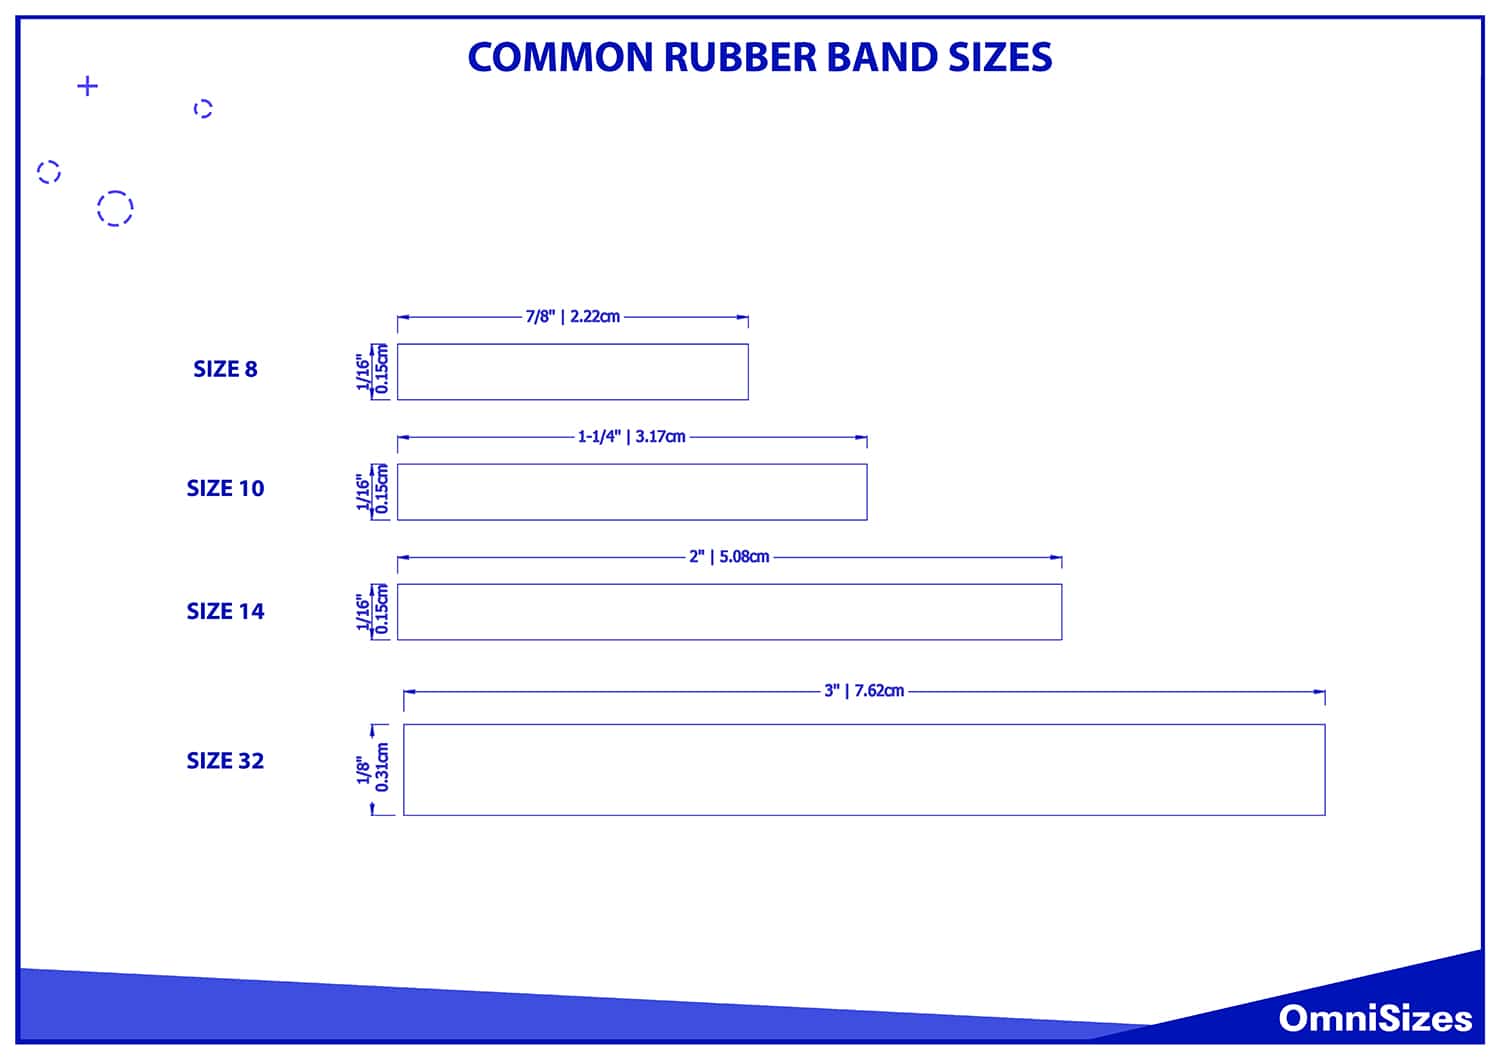 Common rubber band sizes